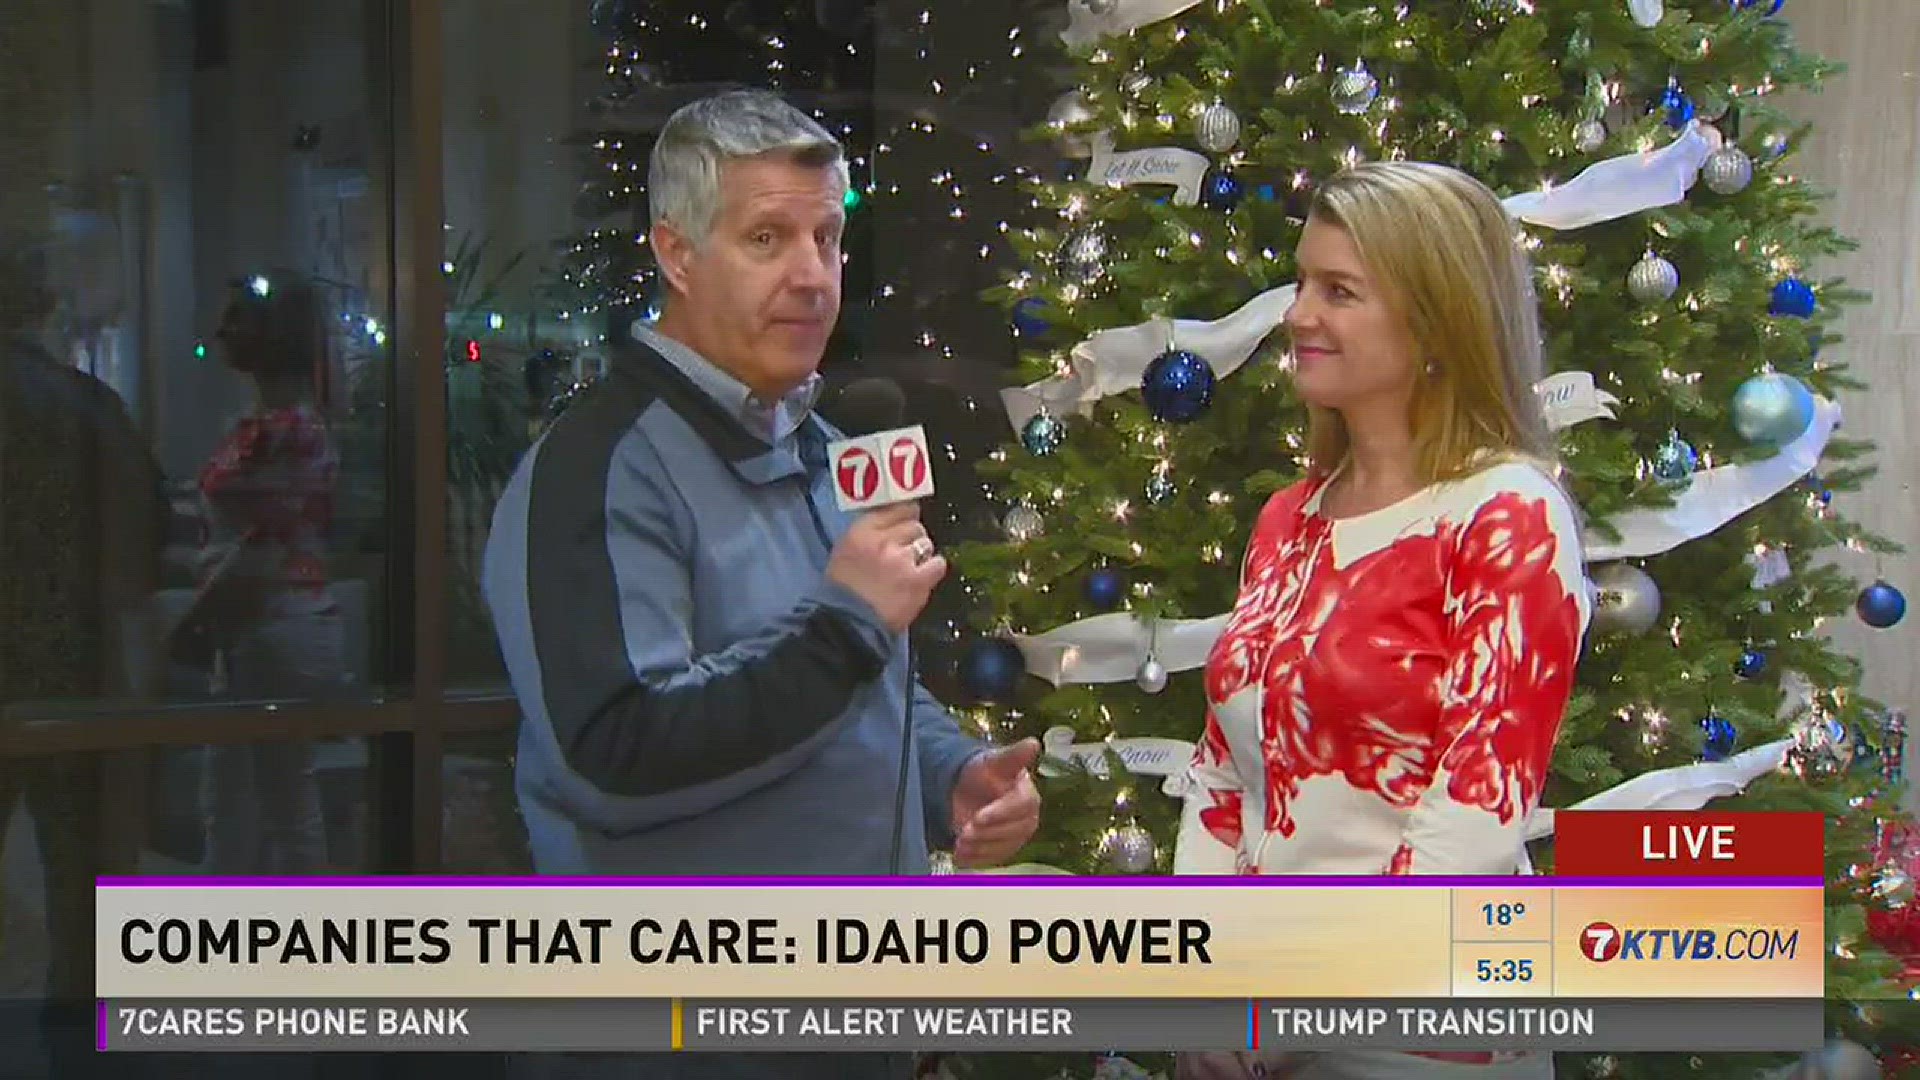 KTVB's Jim Duthie talks with Lynette Standley about why Idaho Power is a 'Company that Cares.'